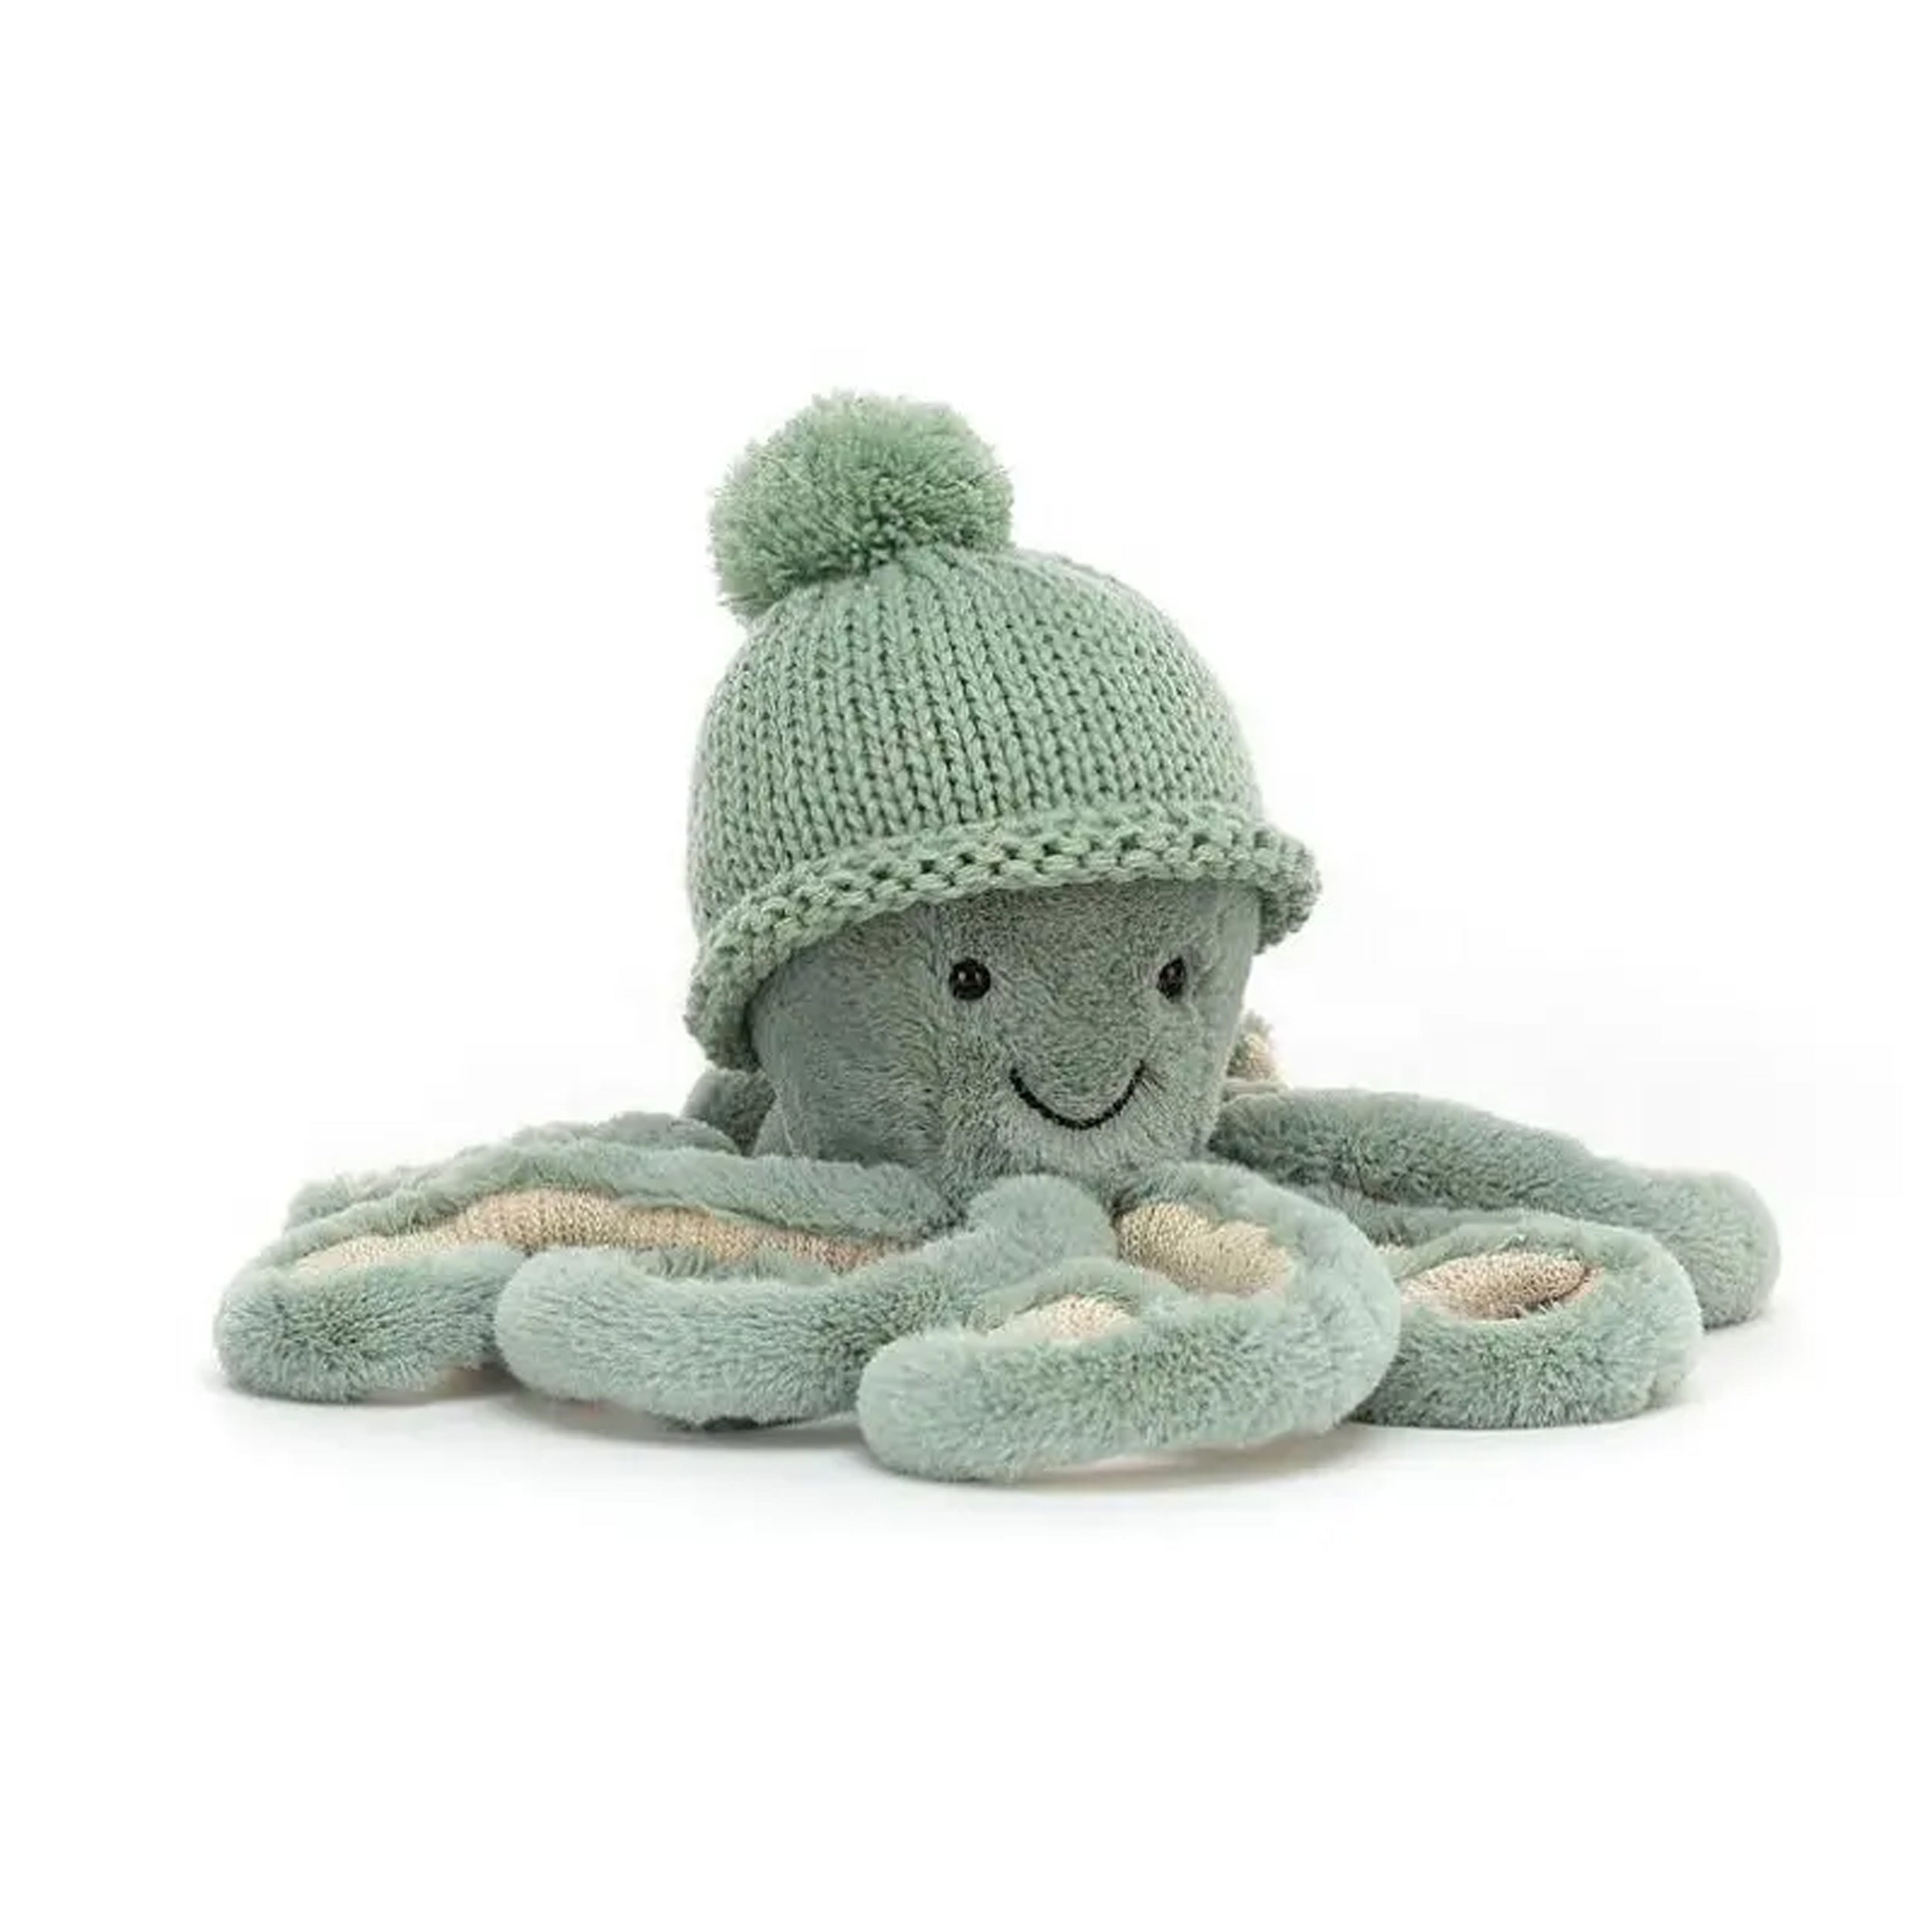 Cute and Cuddly Octopus Plush Soft Stuffed Toy - Perfect for Kids and Adults